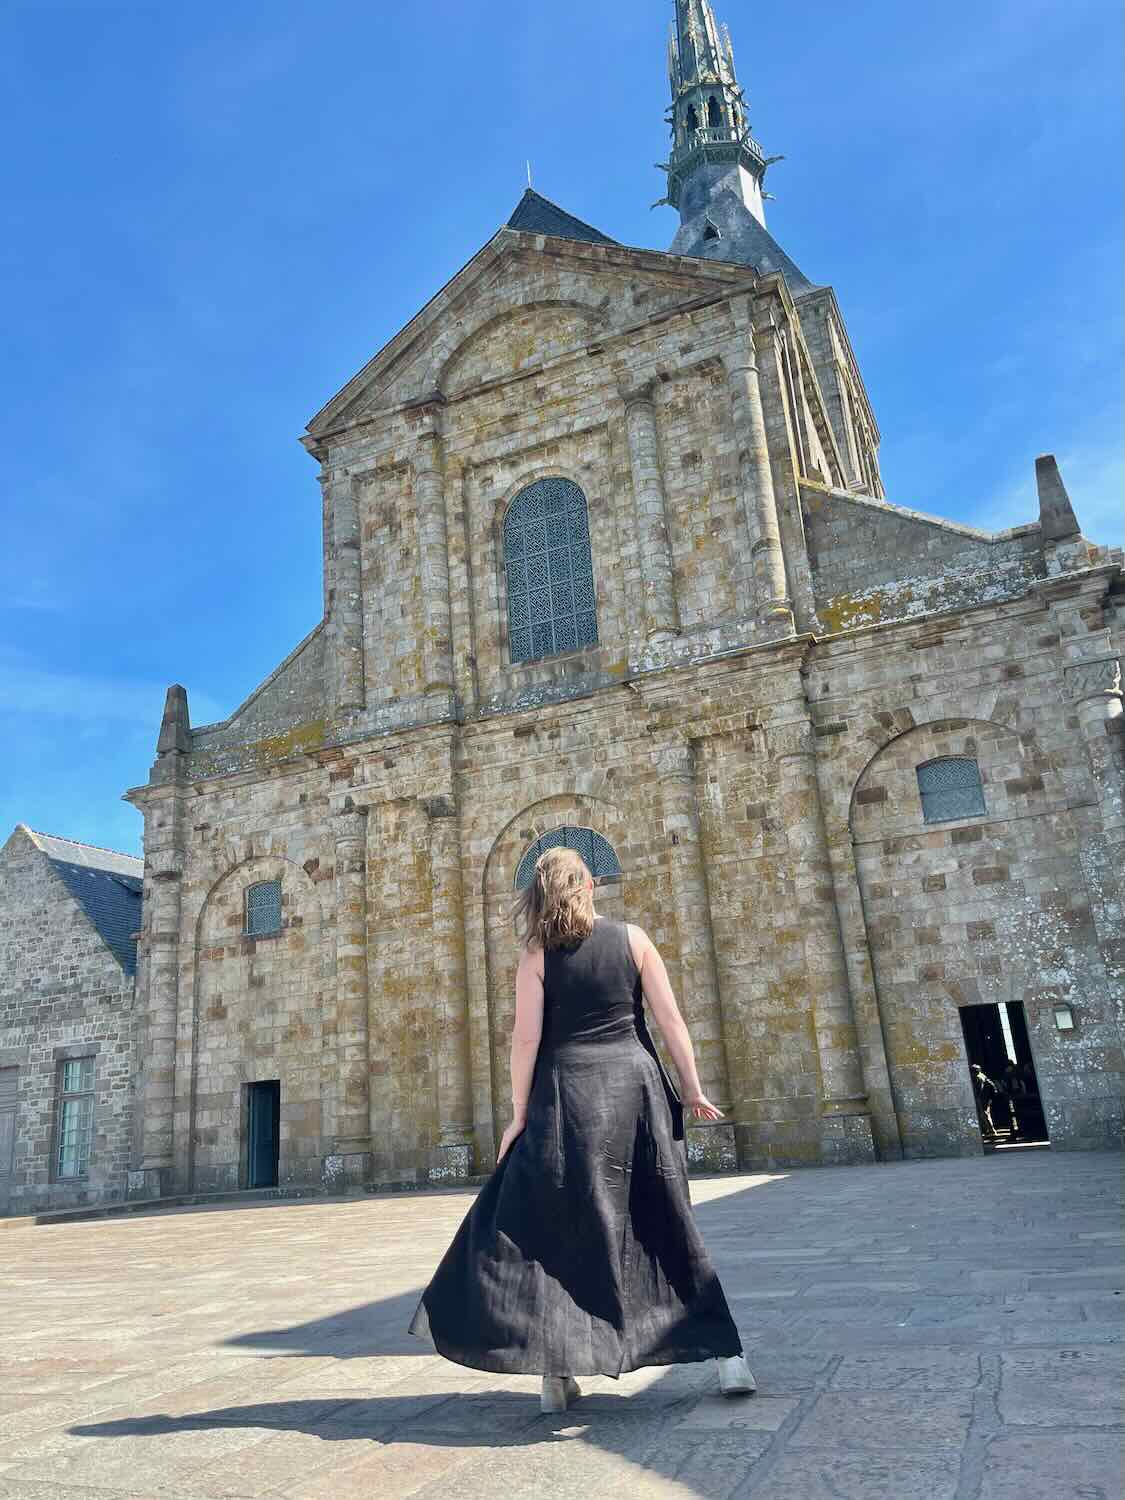 A woman in a black dress walks towards the imposing stone facade of Mont Saint-Michel Abbey under a clear blue sky.